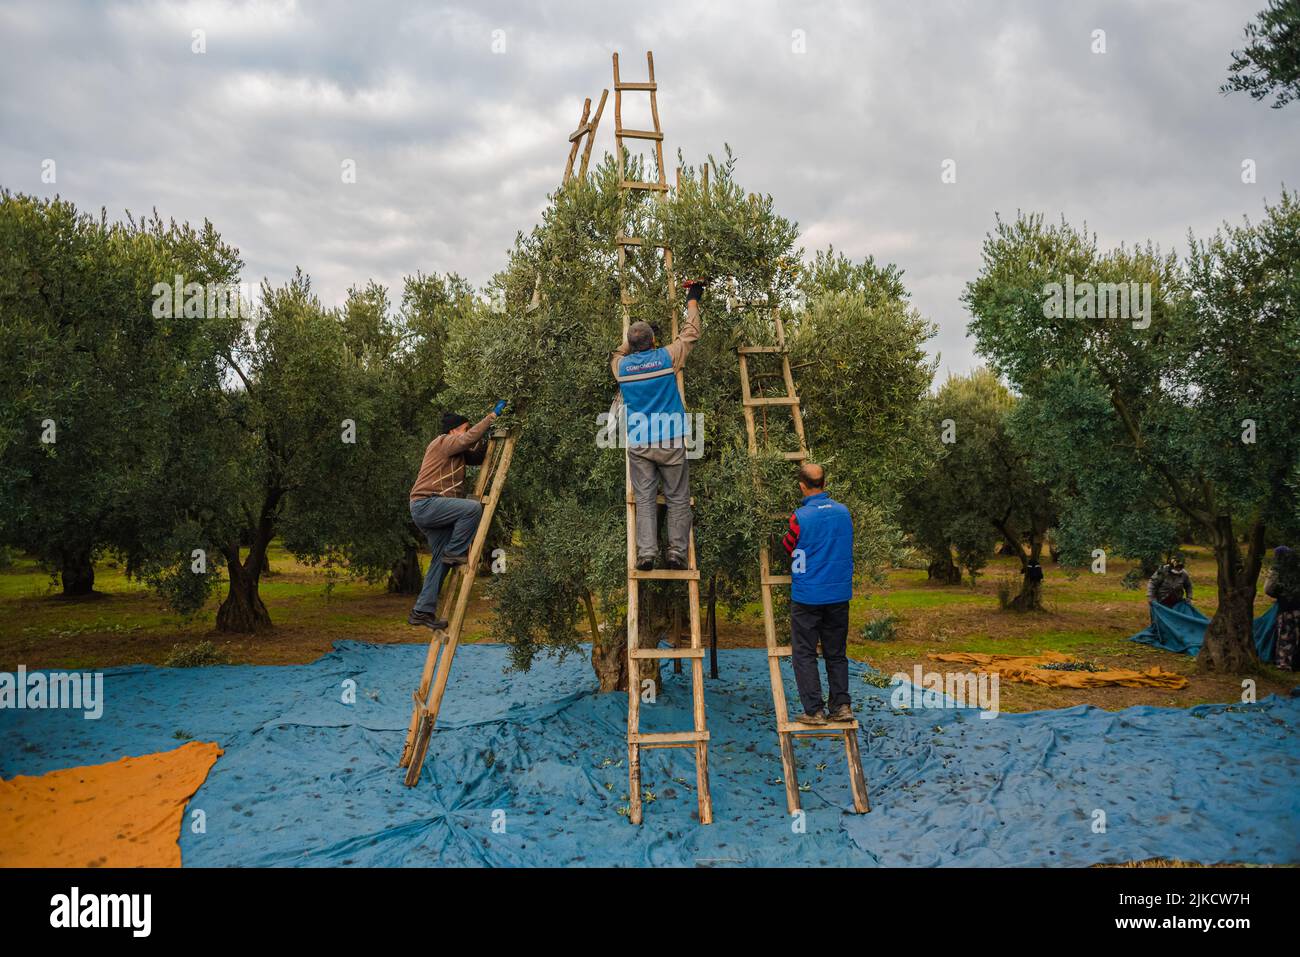 local farmers harvesting olives on ladder Stock Photo